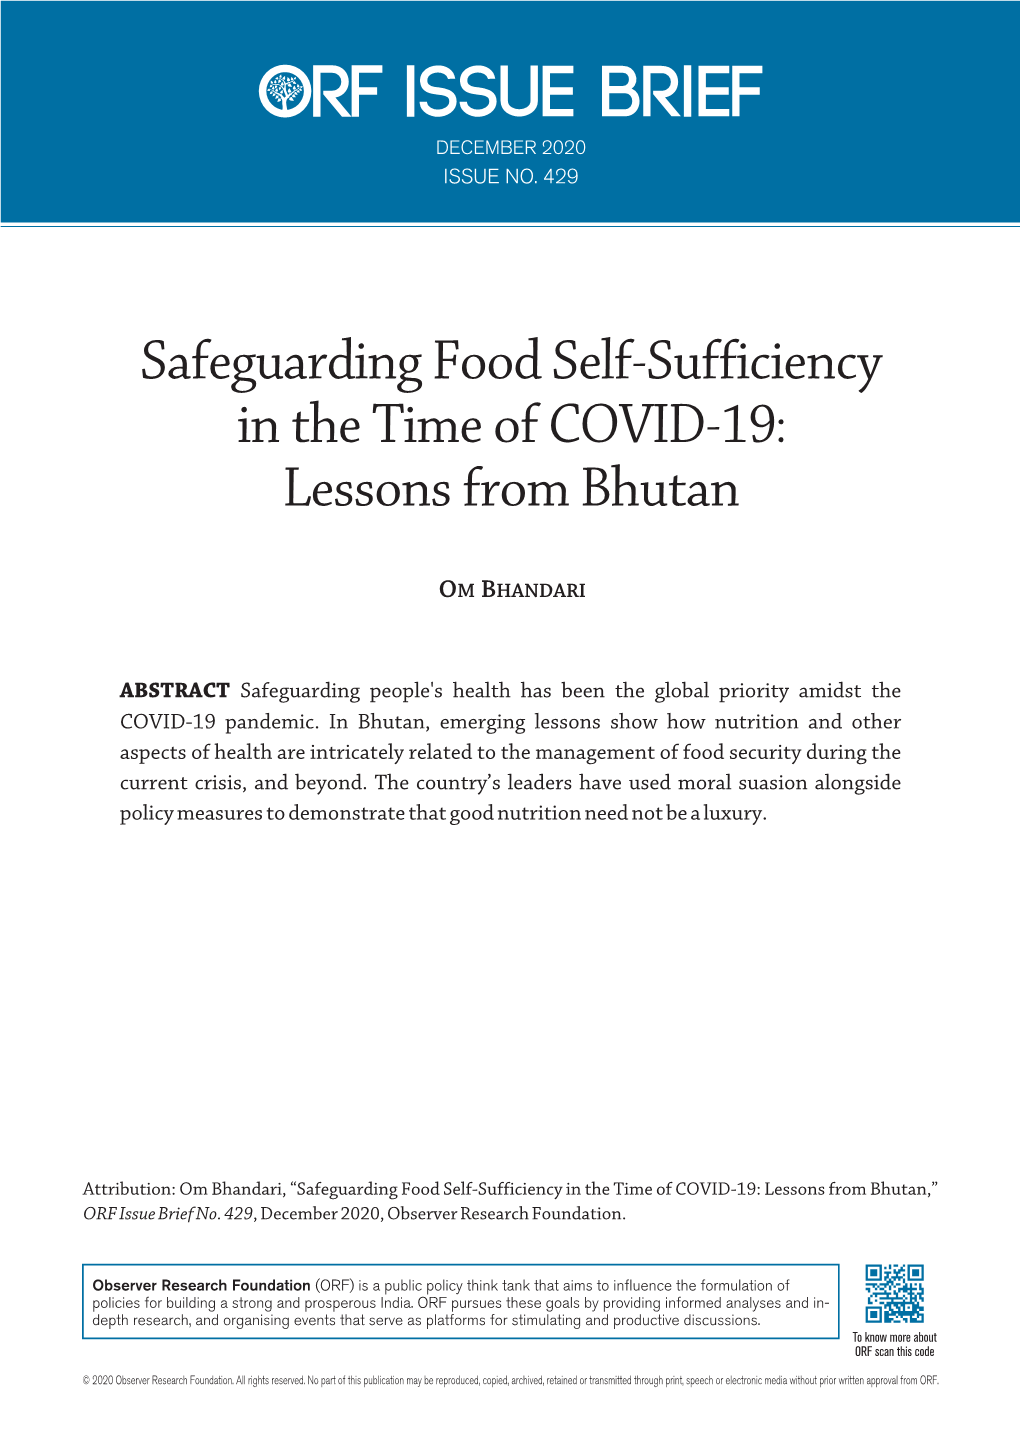 Safeguarding Food Self-Sufficiency in the Time of COVID-19: Lessons from Bhutan